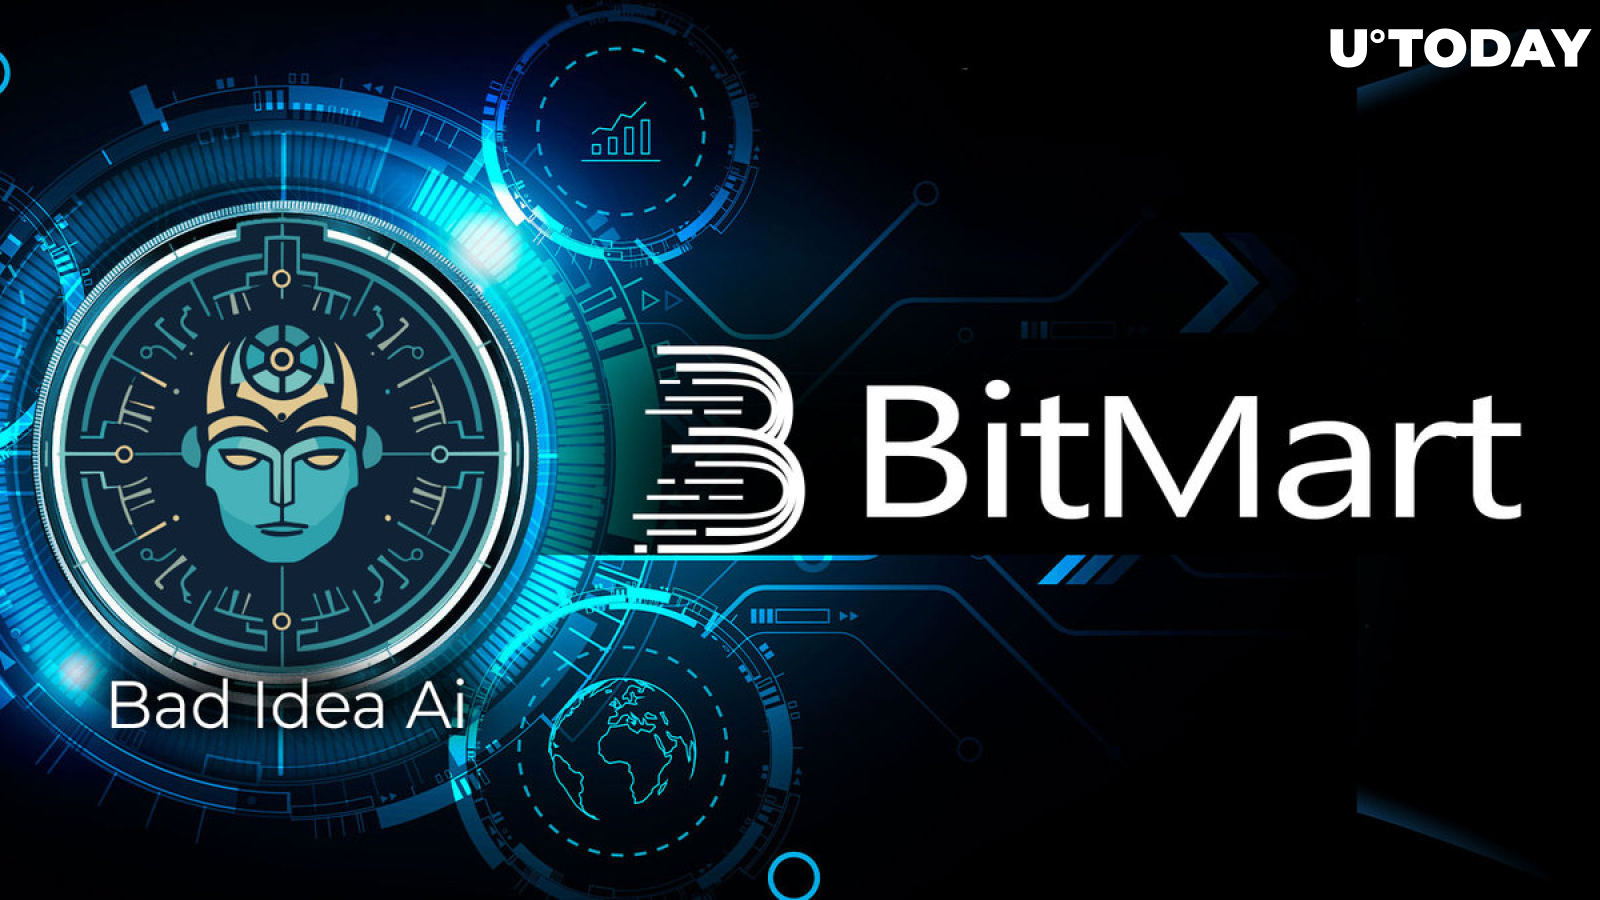 Shibarium Partner and BitMart Announce Lucrative Offer to SHIB and BAD Users